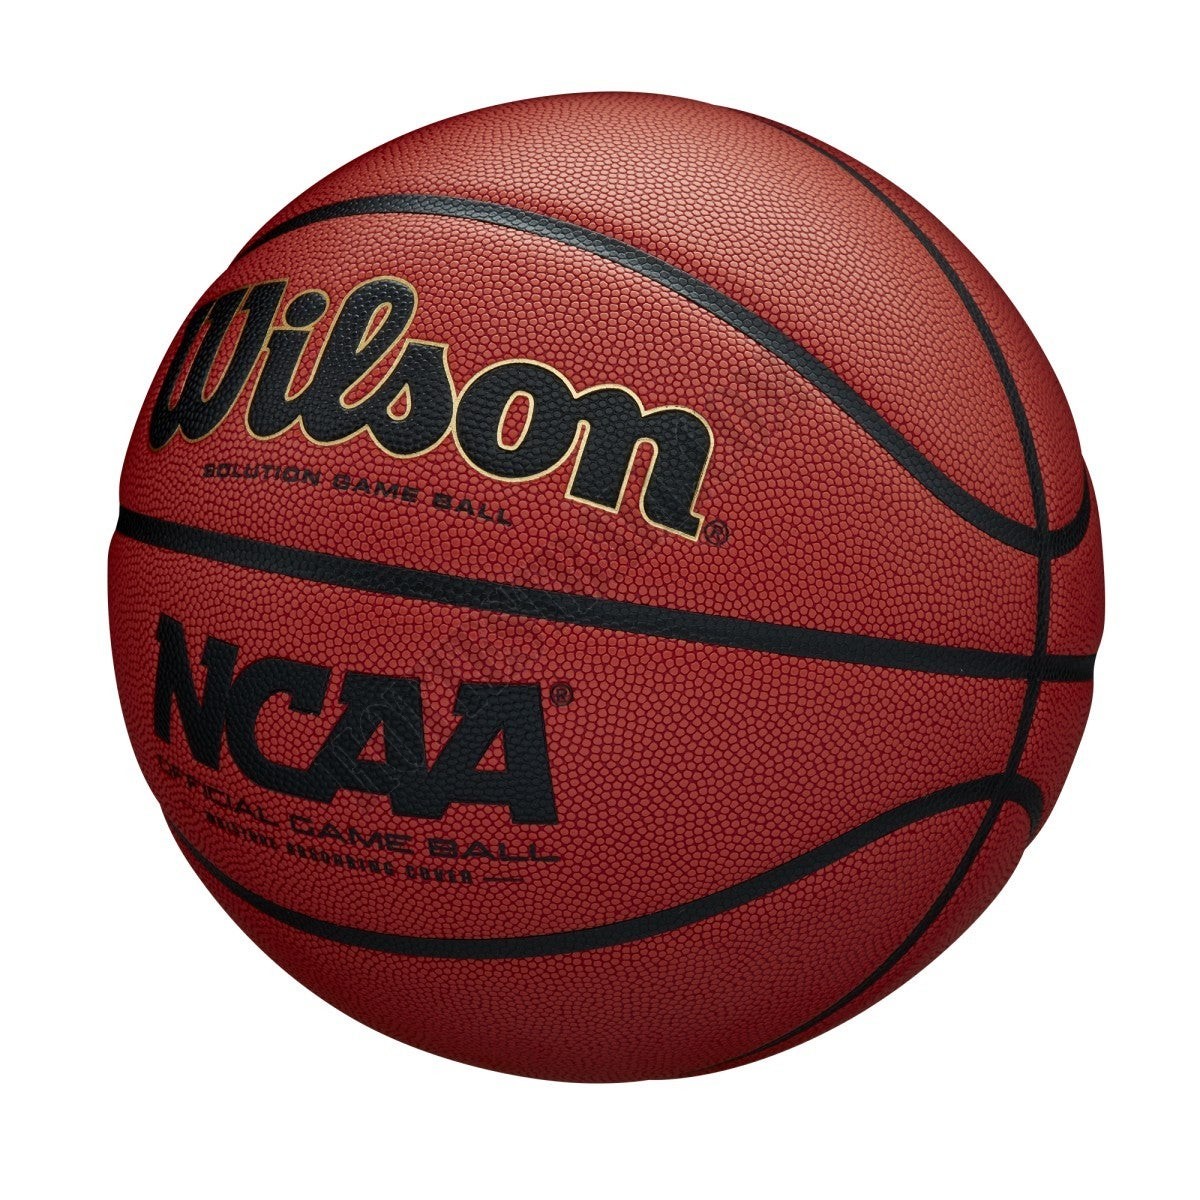 NCAA Official Game Basketball - Wilson Discount Store - -1